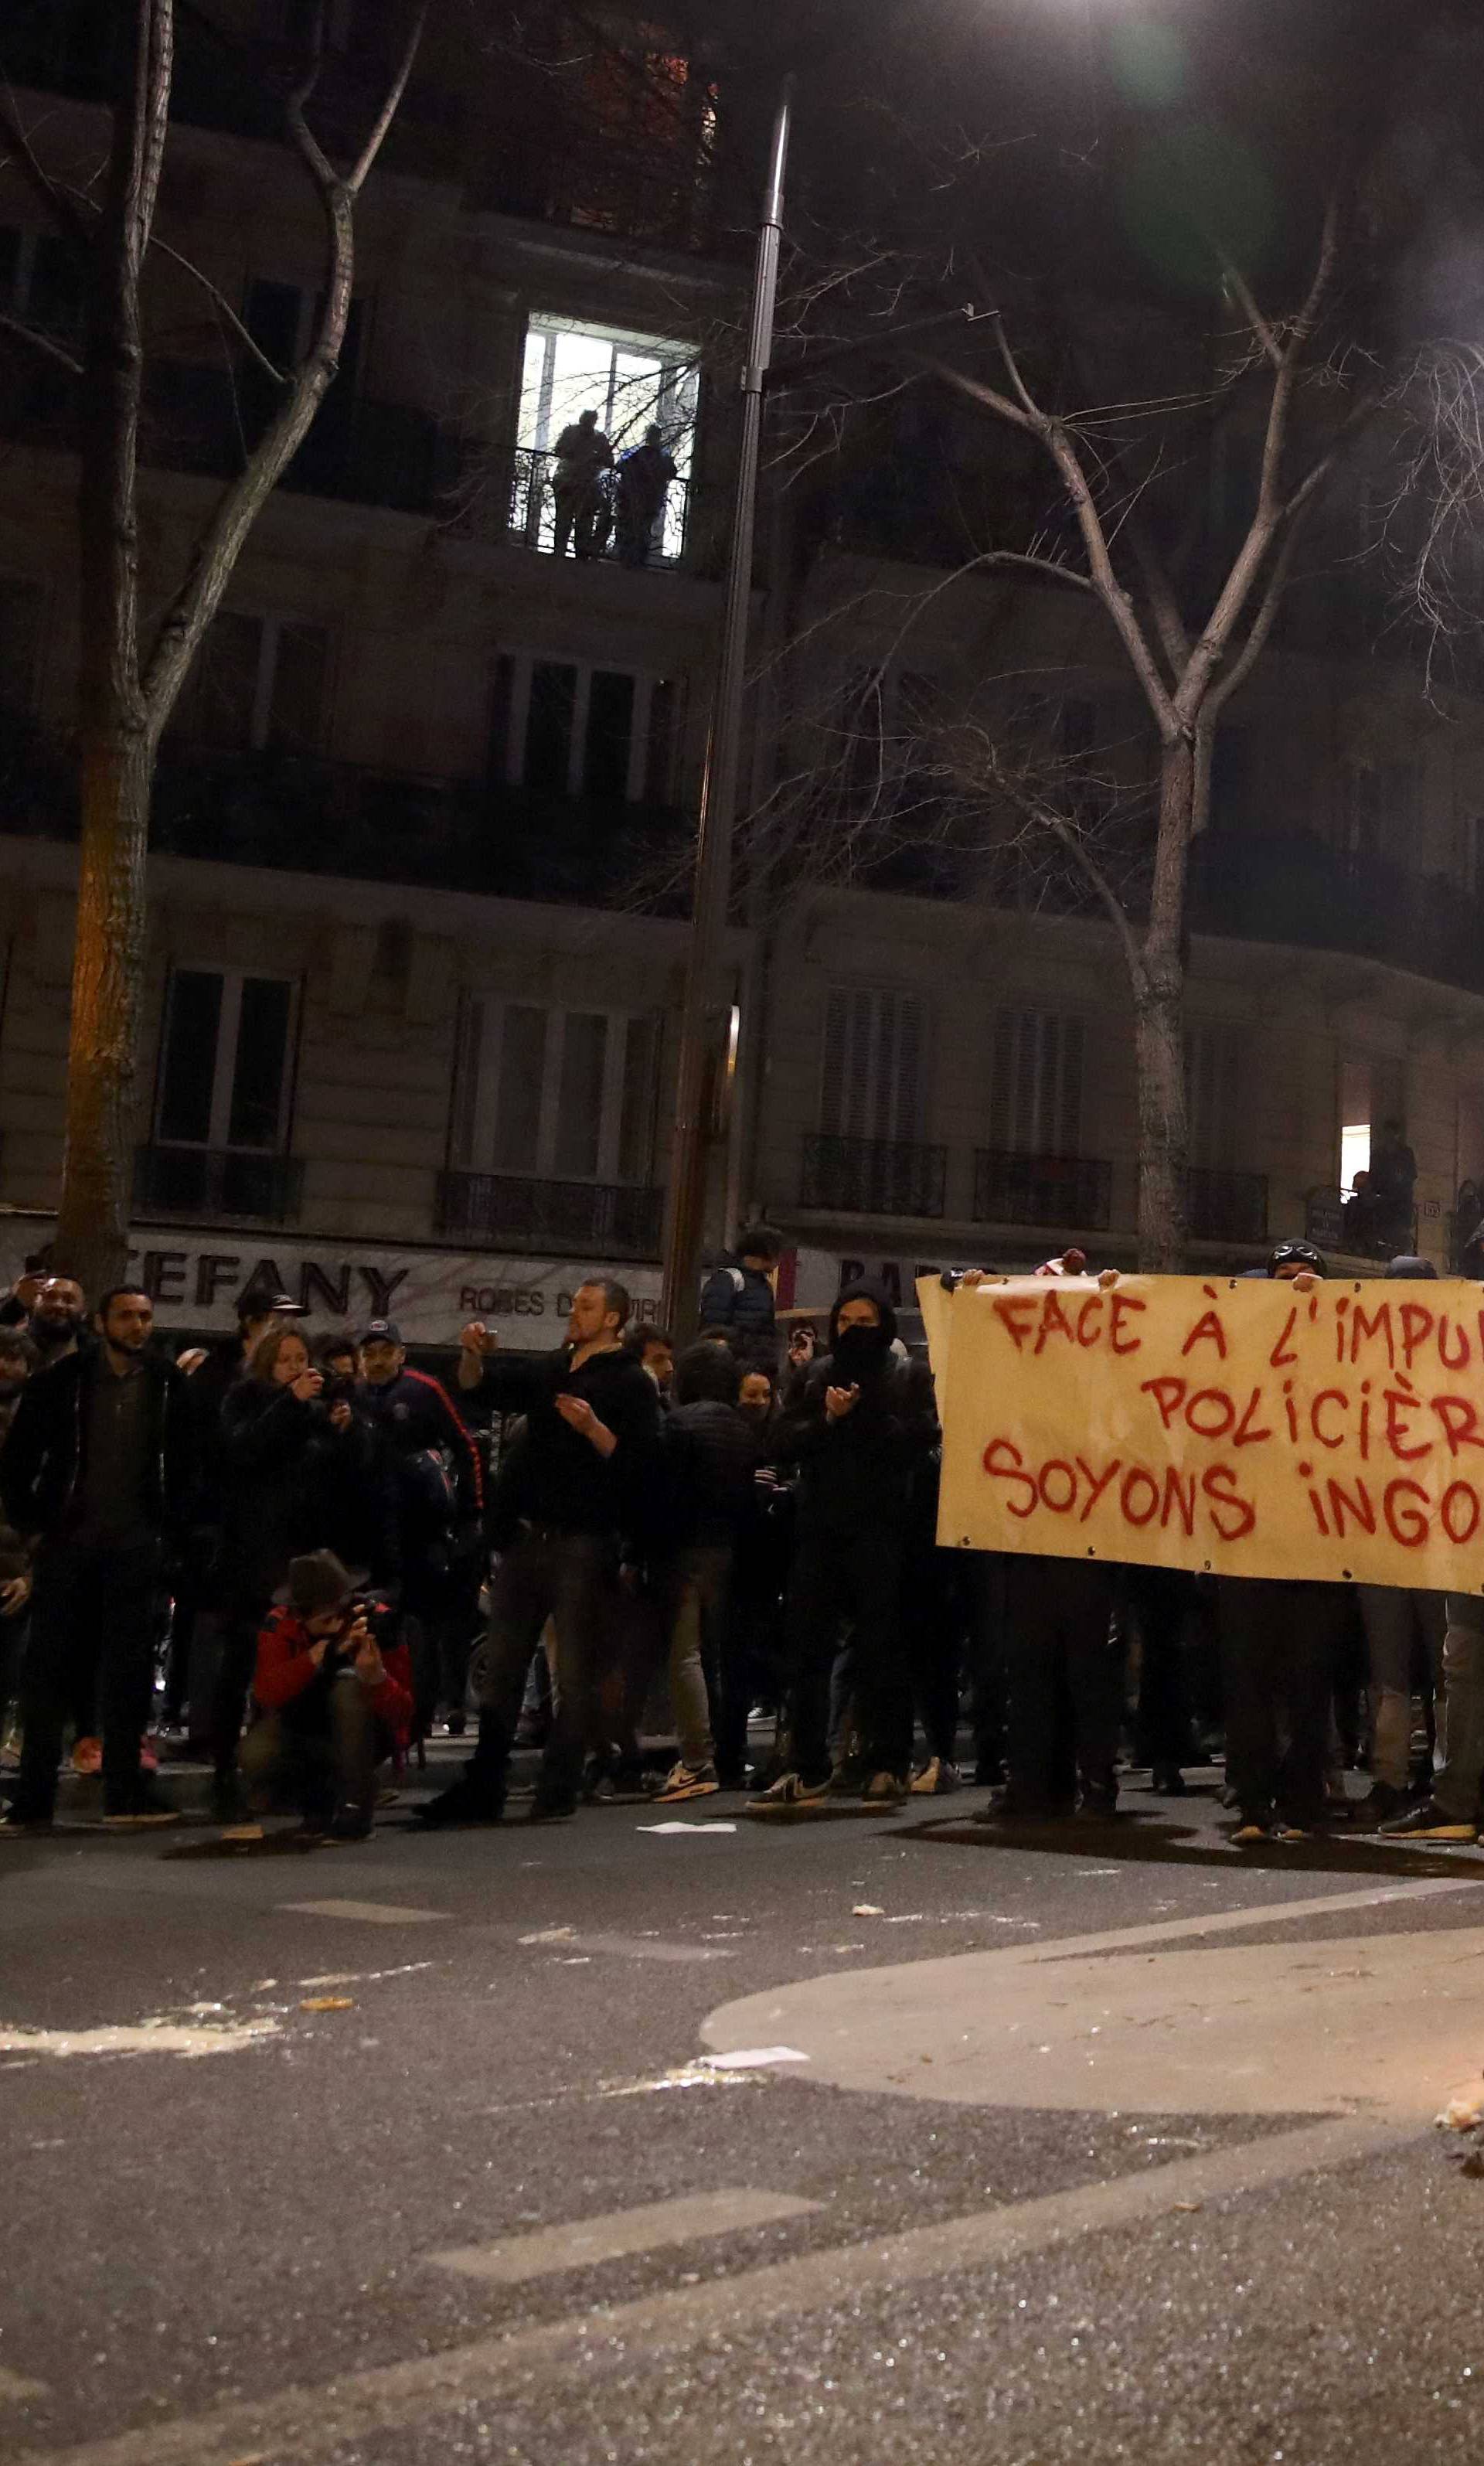 Trash burns on the street as people hold a banners with messages to protest police brutality as they gather at a deomostration in Paris 